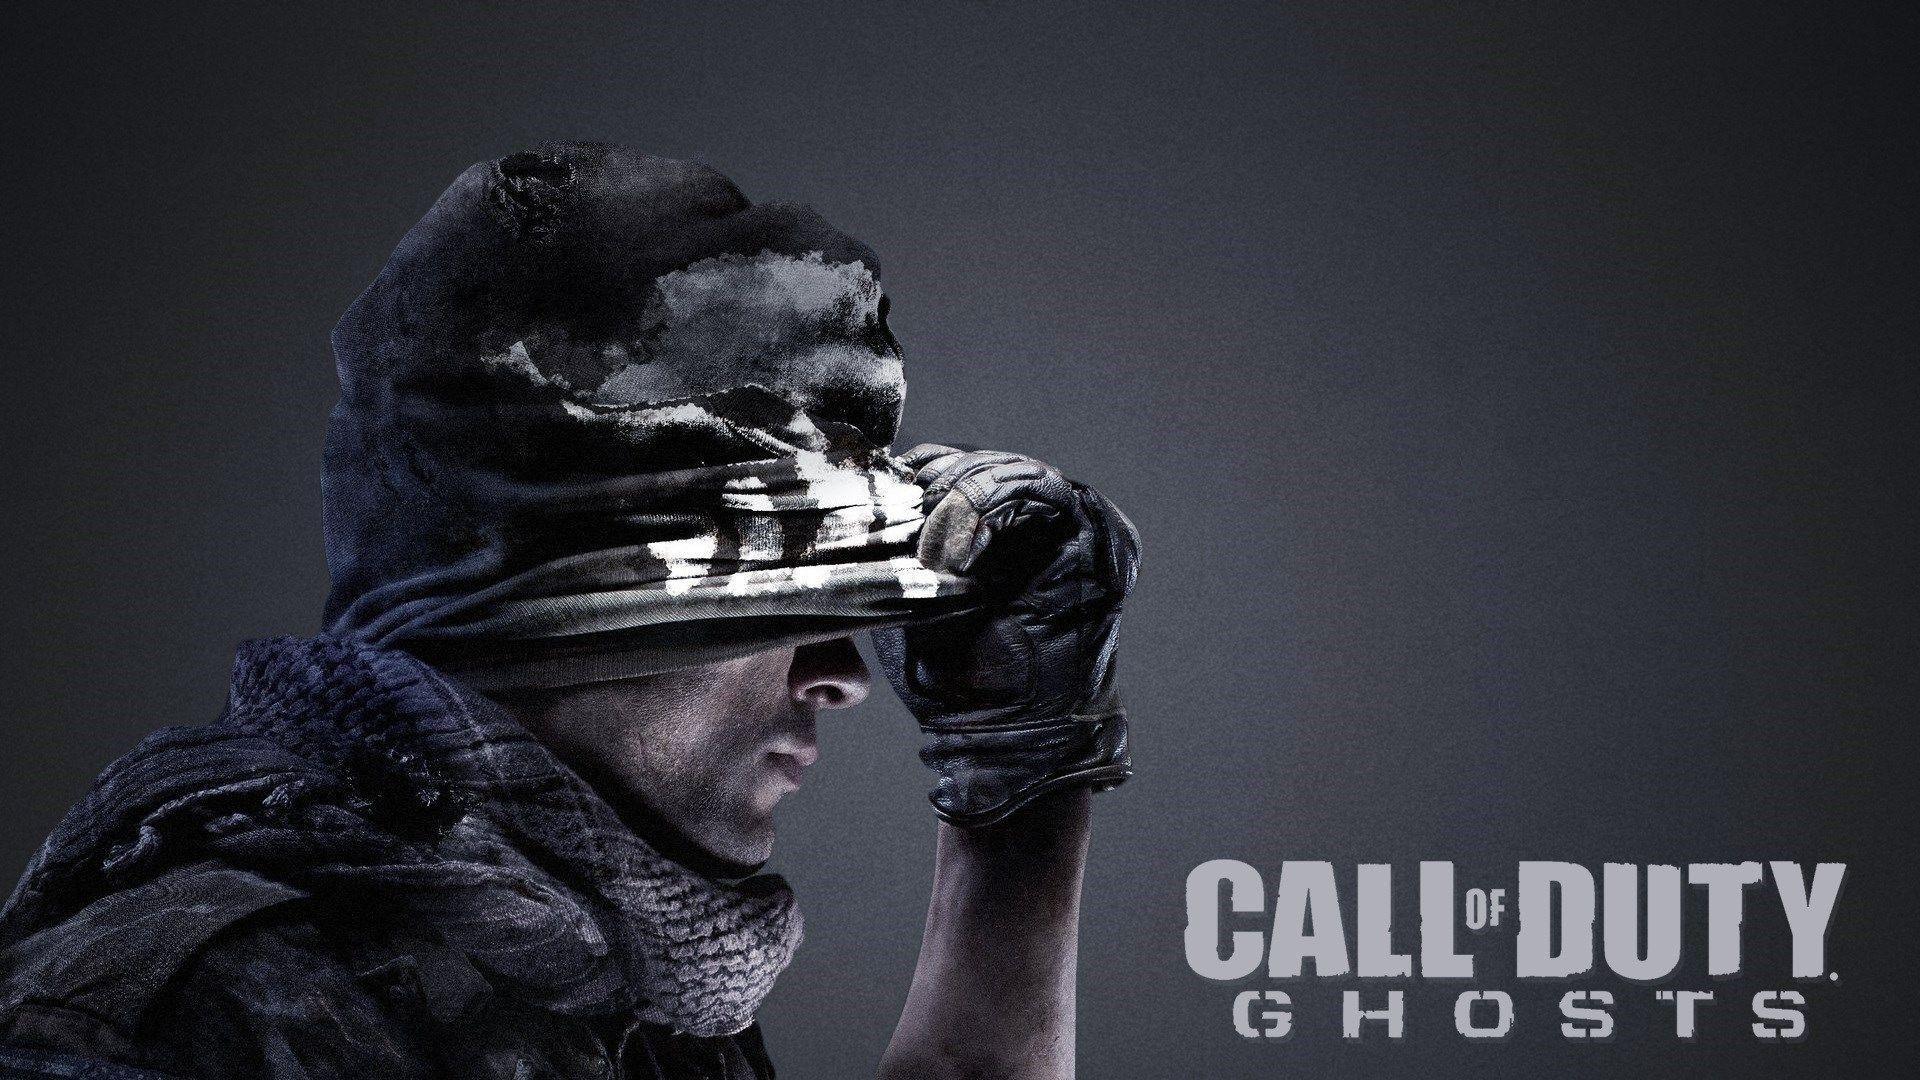 Call Of Duty Ghosts HD Wallpaper Call Of Duty Ghost 2015 Wallpaper